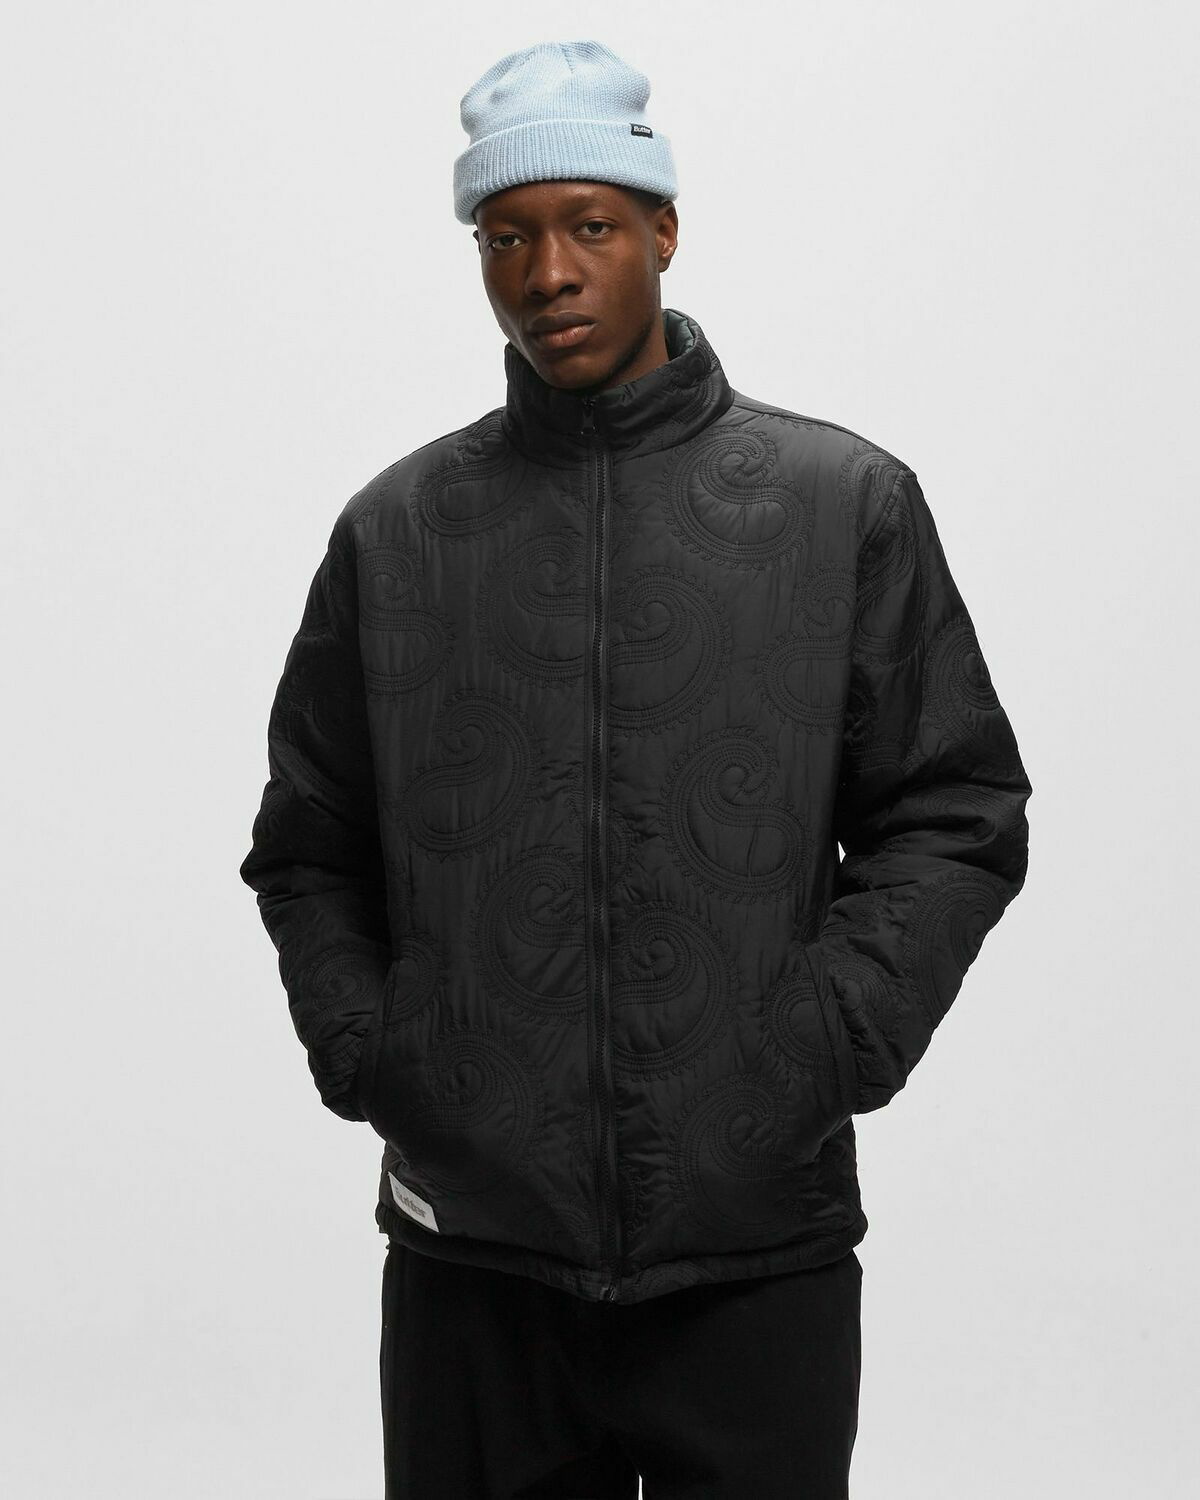 Reversible Puffer Jacket - Grey and Black